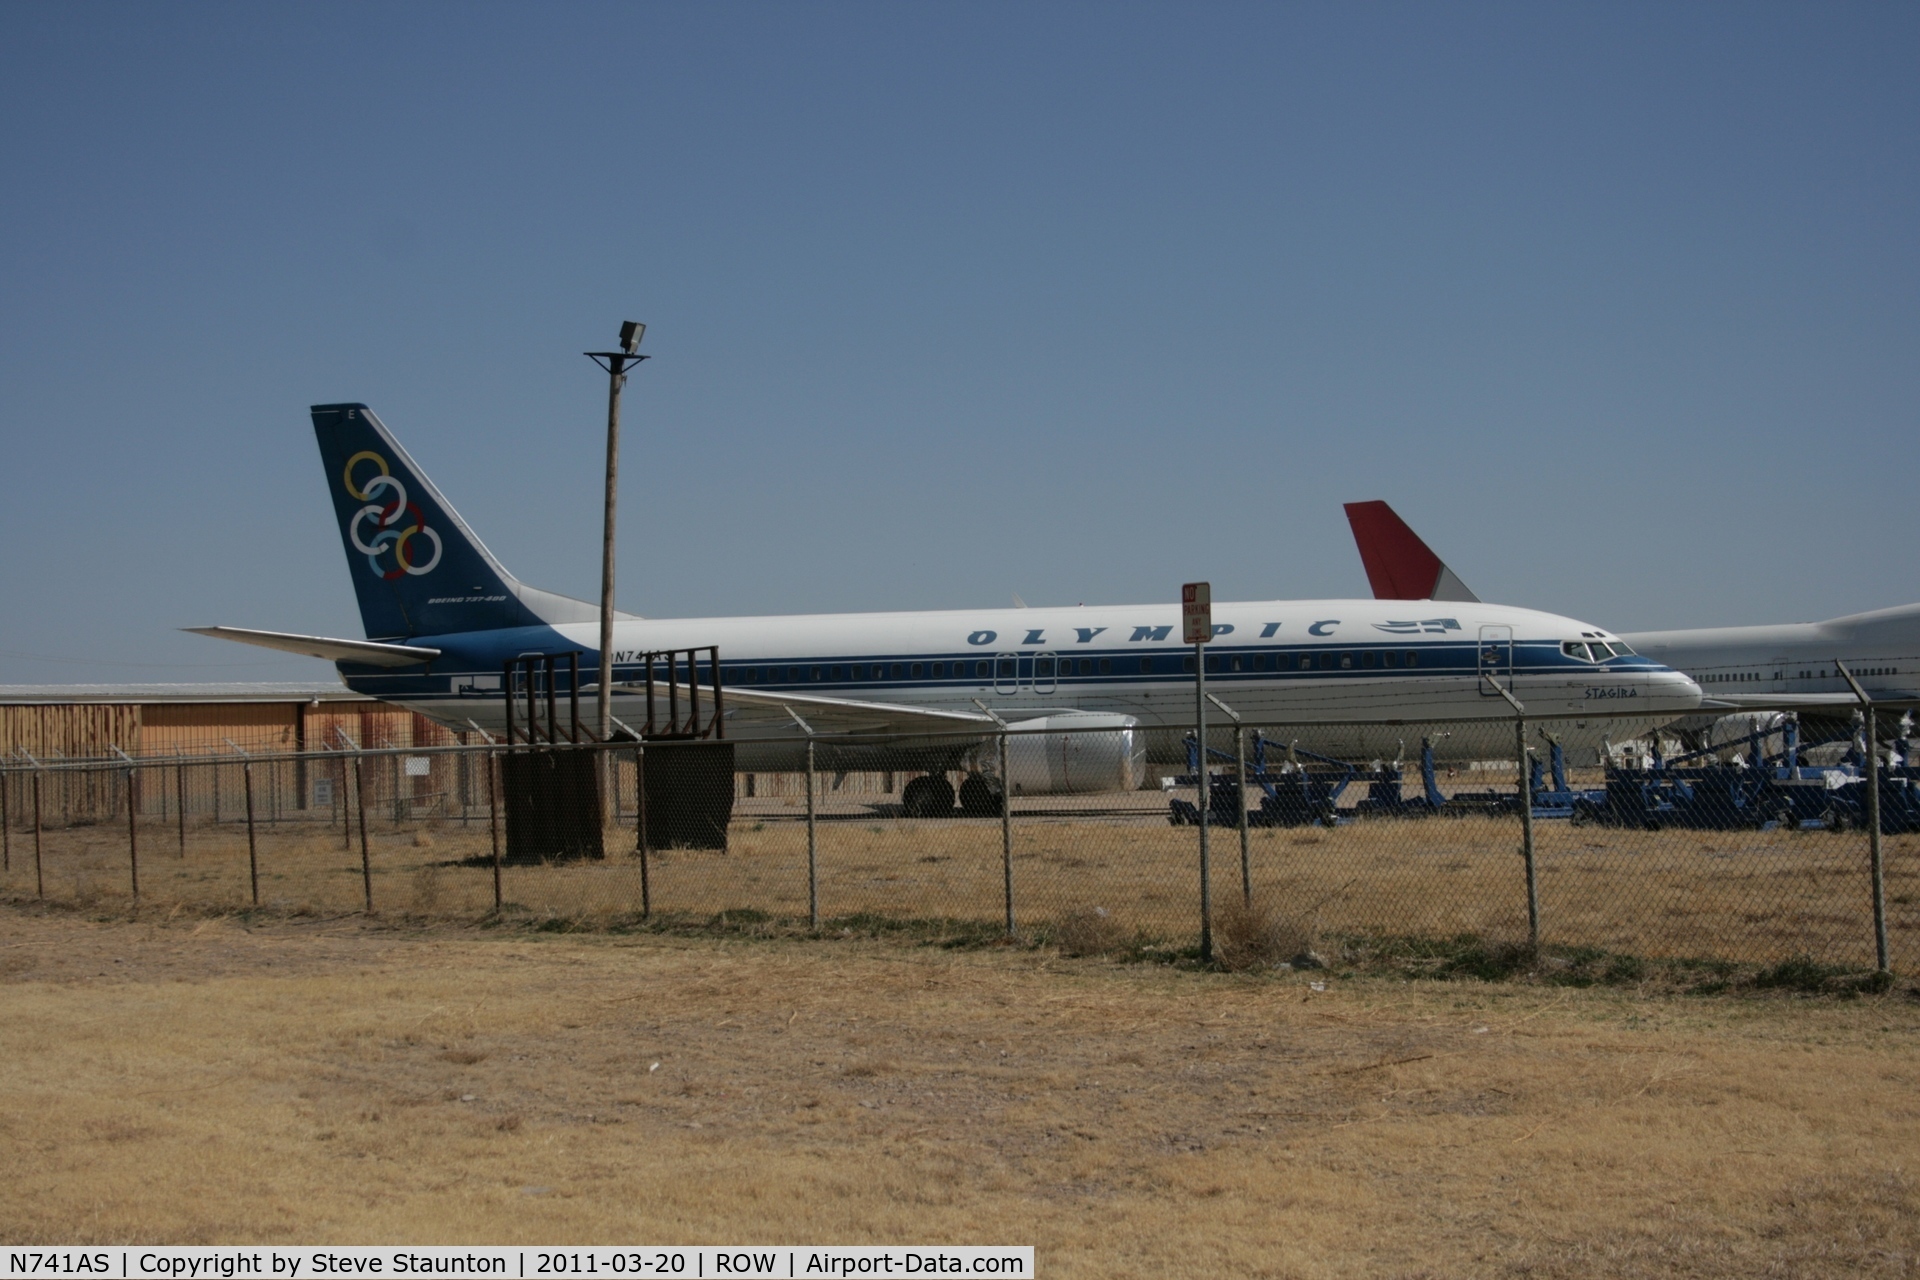 N741AS, 1991 Boeing 737-484 C/N 25417, Taken at Roswell International Air Centre Storage Facility, New Mexico in March 2011 whilst on an Aeroprint Aviation tour